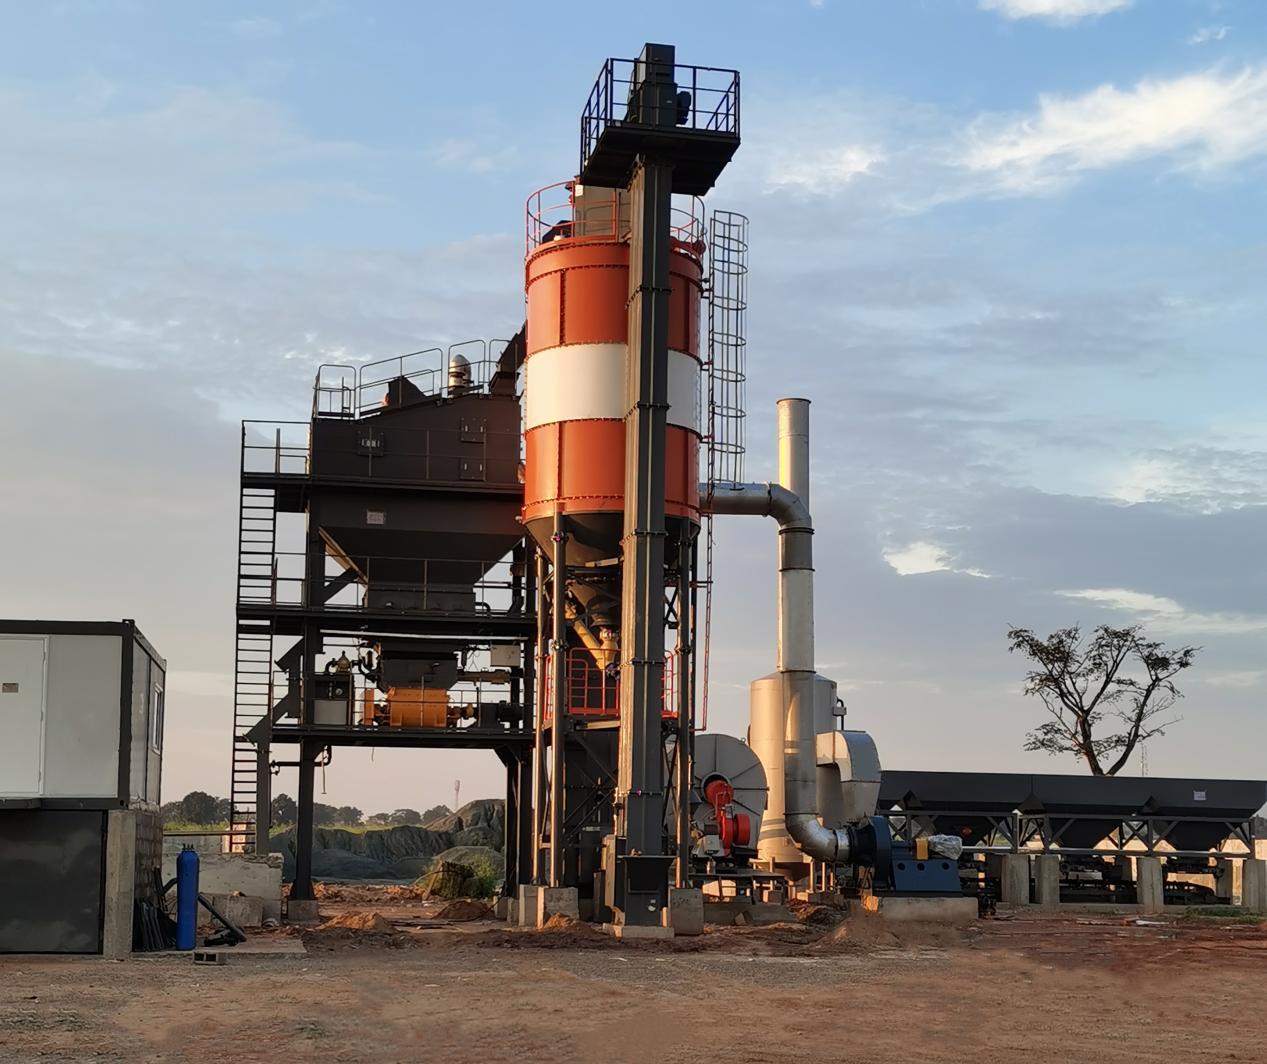 Shantui Janeoo Asphalt mixing plant helps the construction of Central Africa Airport Runway and Road Upgrade Project